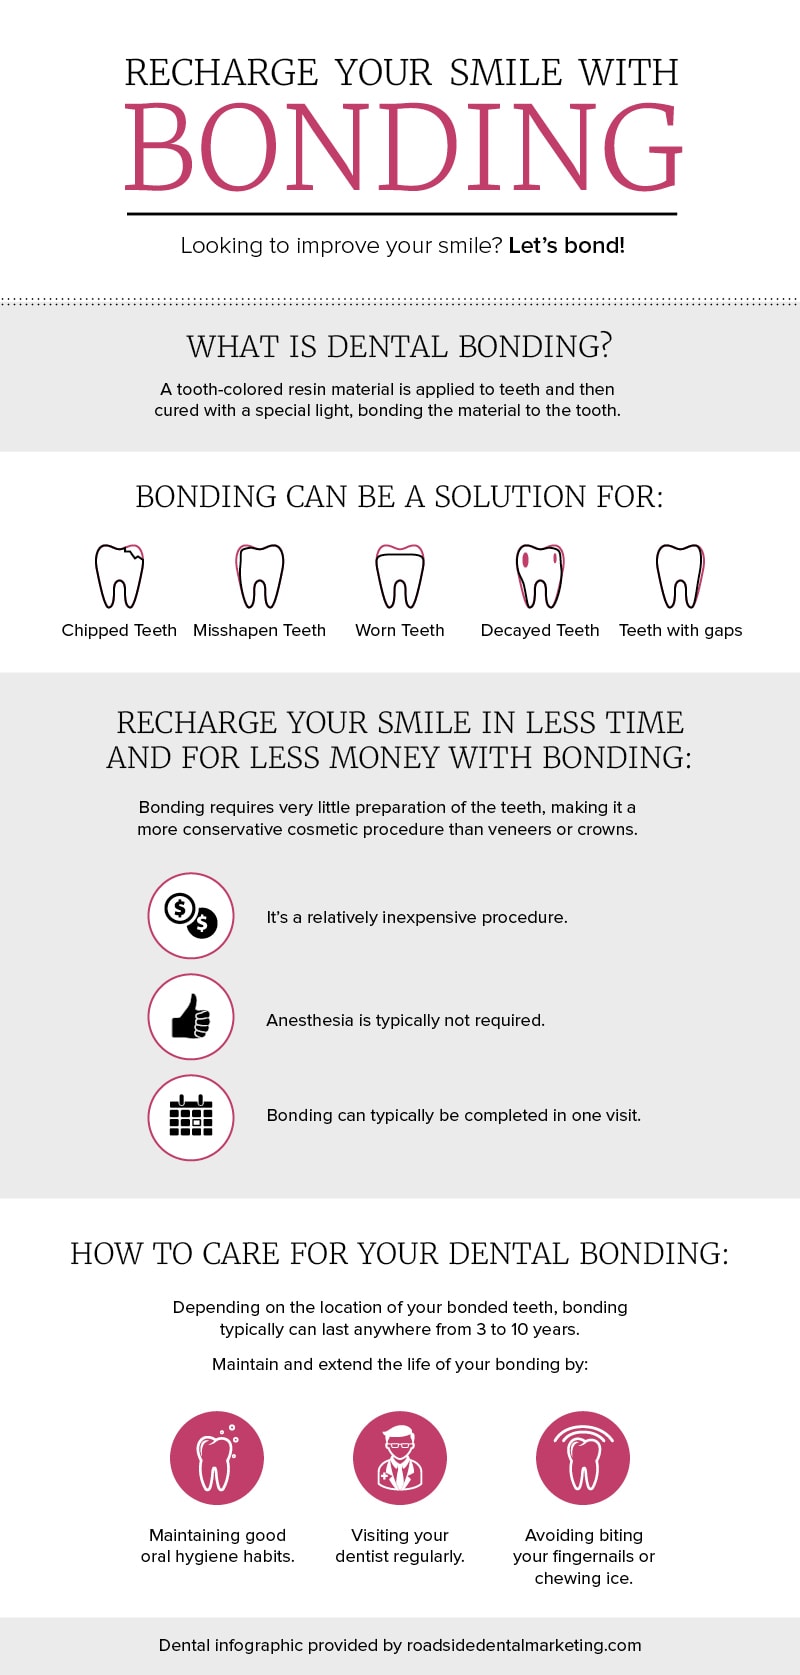 Recharge Your Smile with Dental Bonding